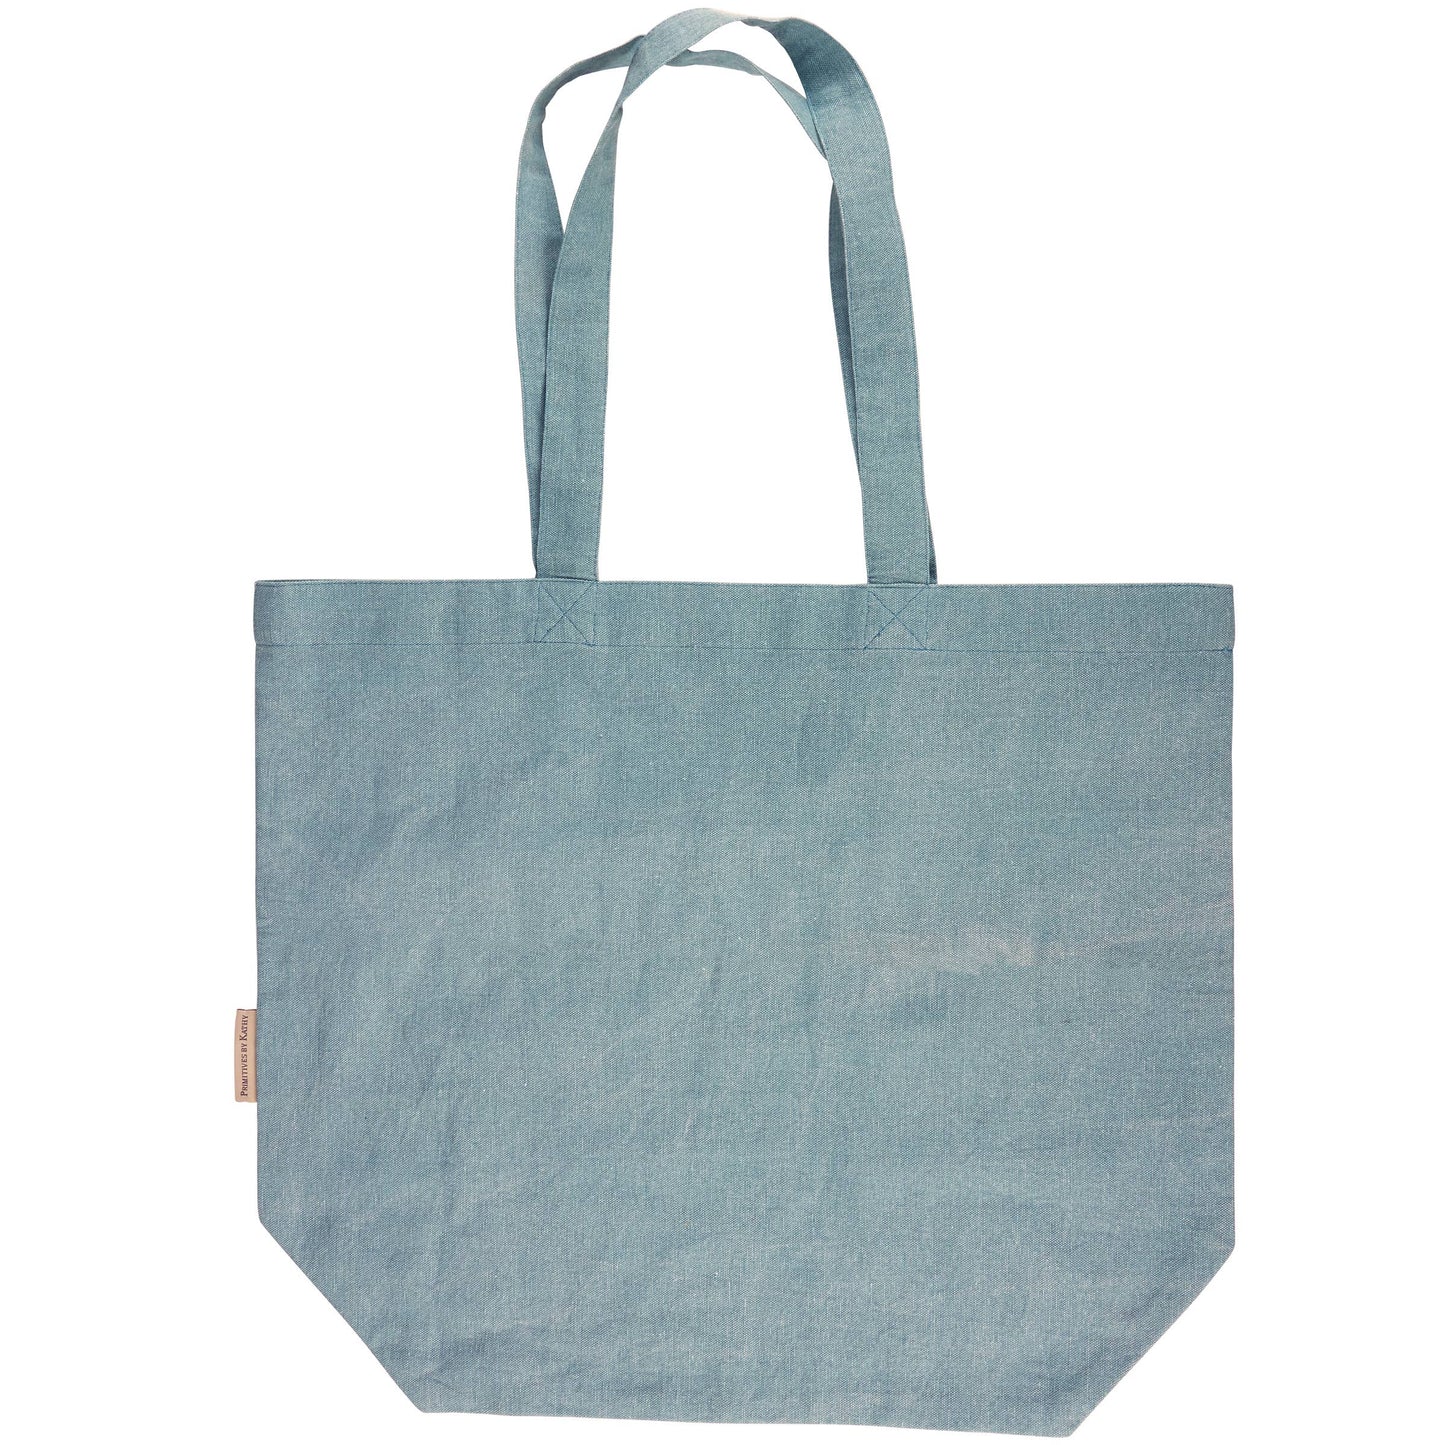 Primitives by Kathy - Beaching Not Teaching Tote